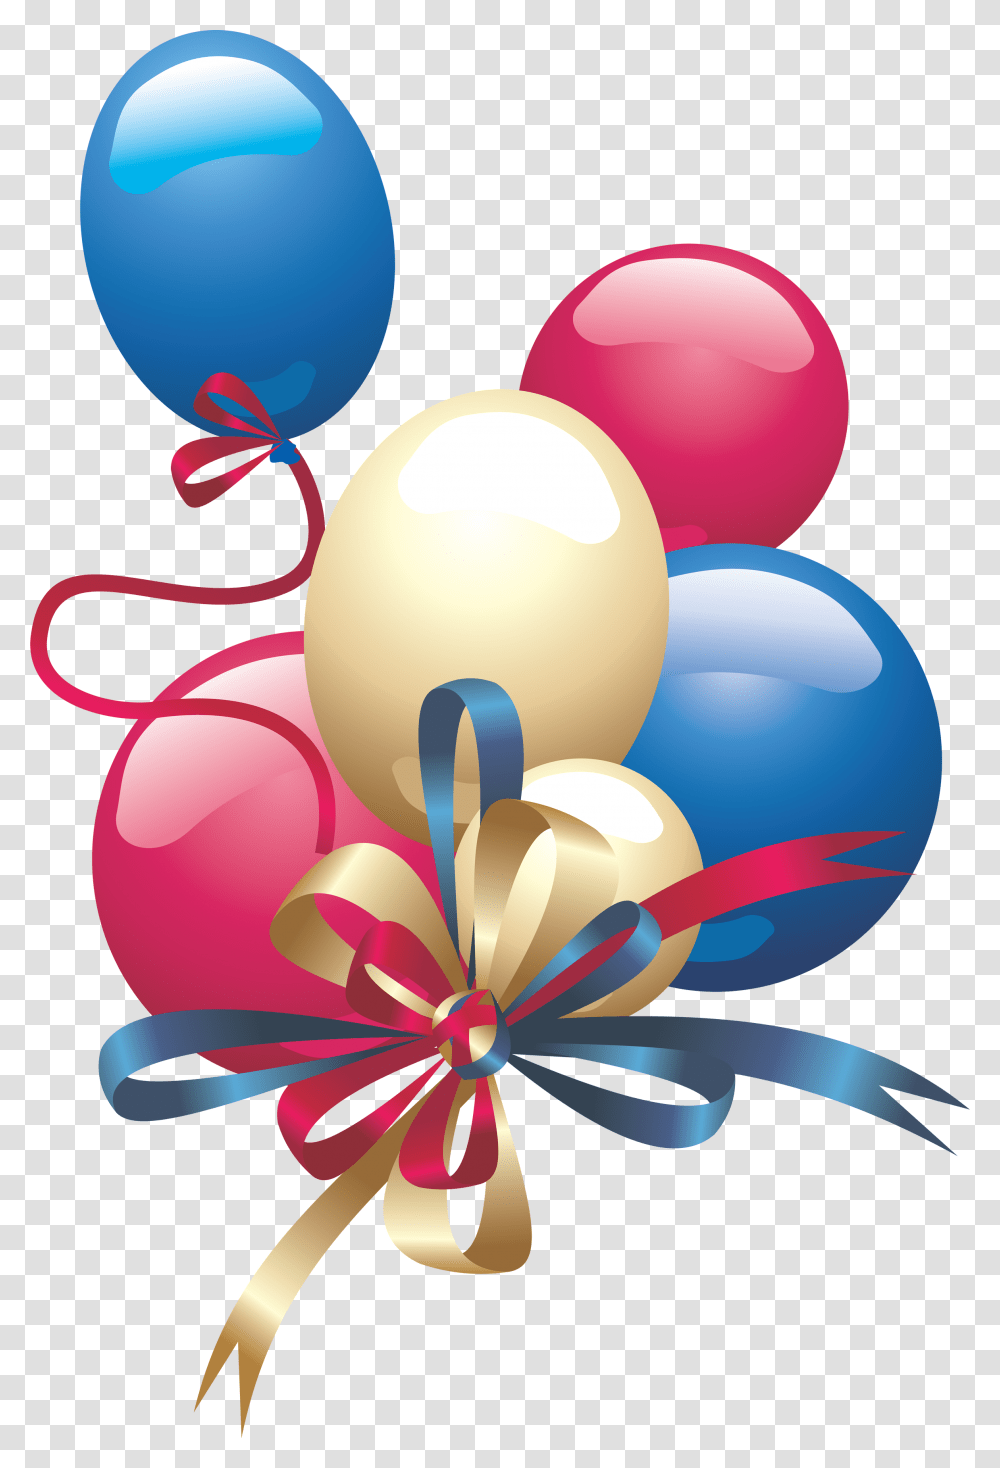 Balloons With Ribbon Knotted Images Download Birthday Balloon Hd, Gift Transparent Png